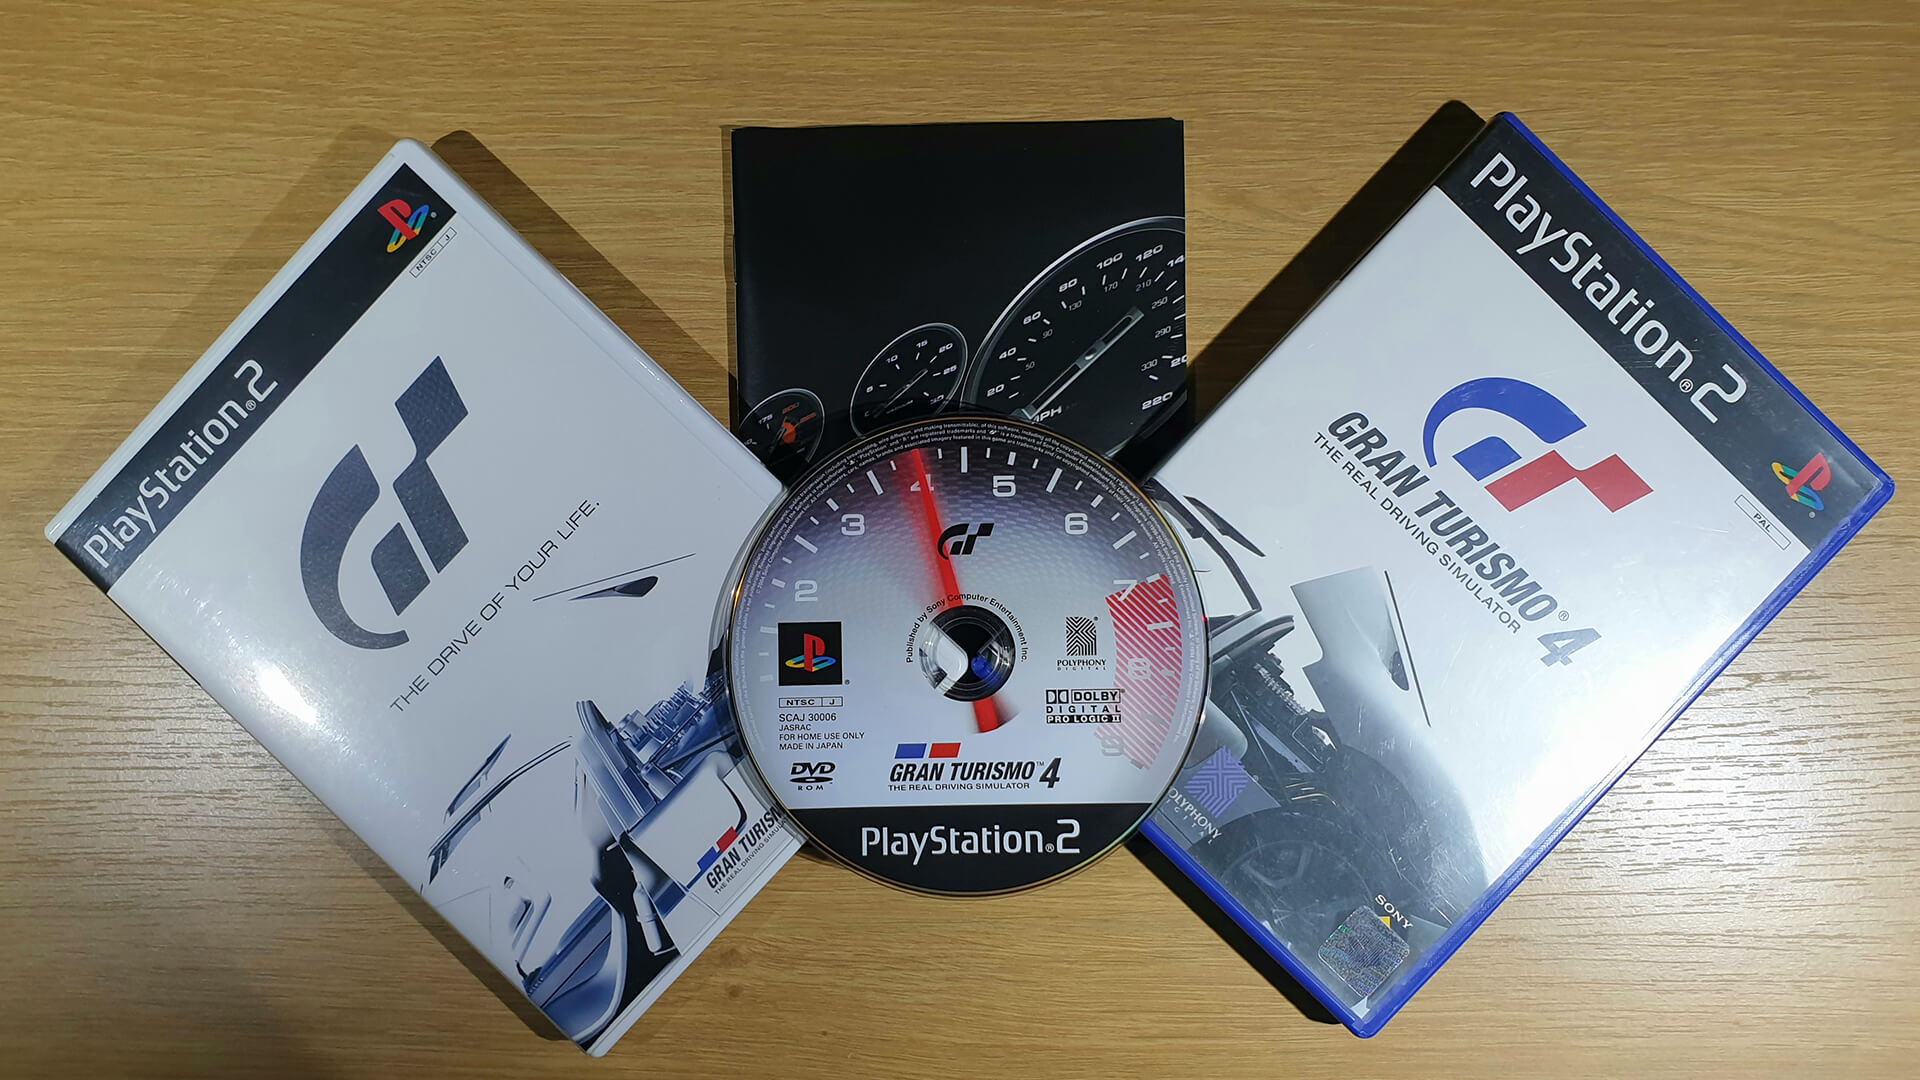 SONY PS2 PLAYSTATION 2 JAPAN NTSC GRAN TURISMO 4 LIMITED EDITION